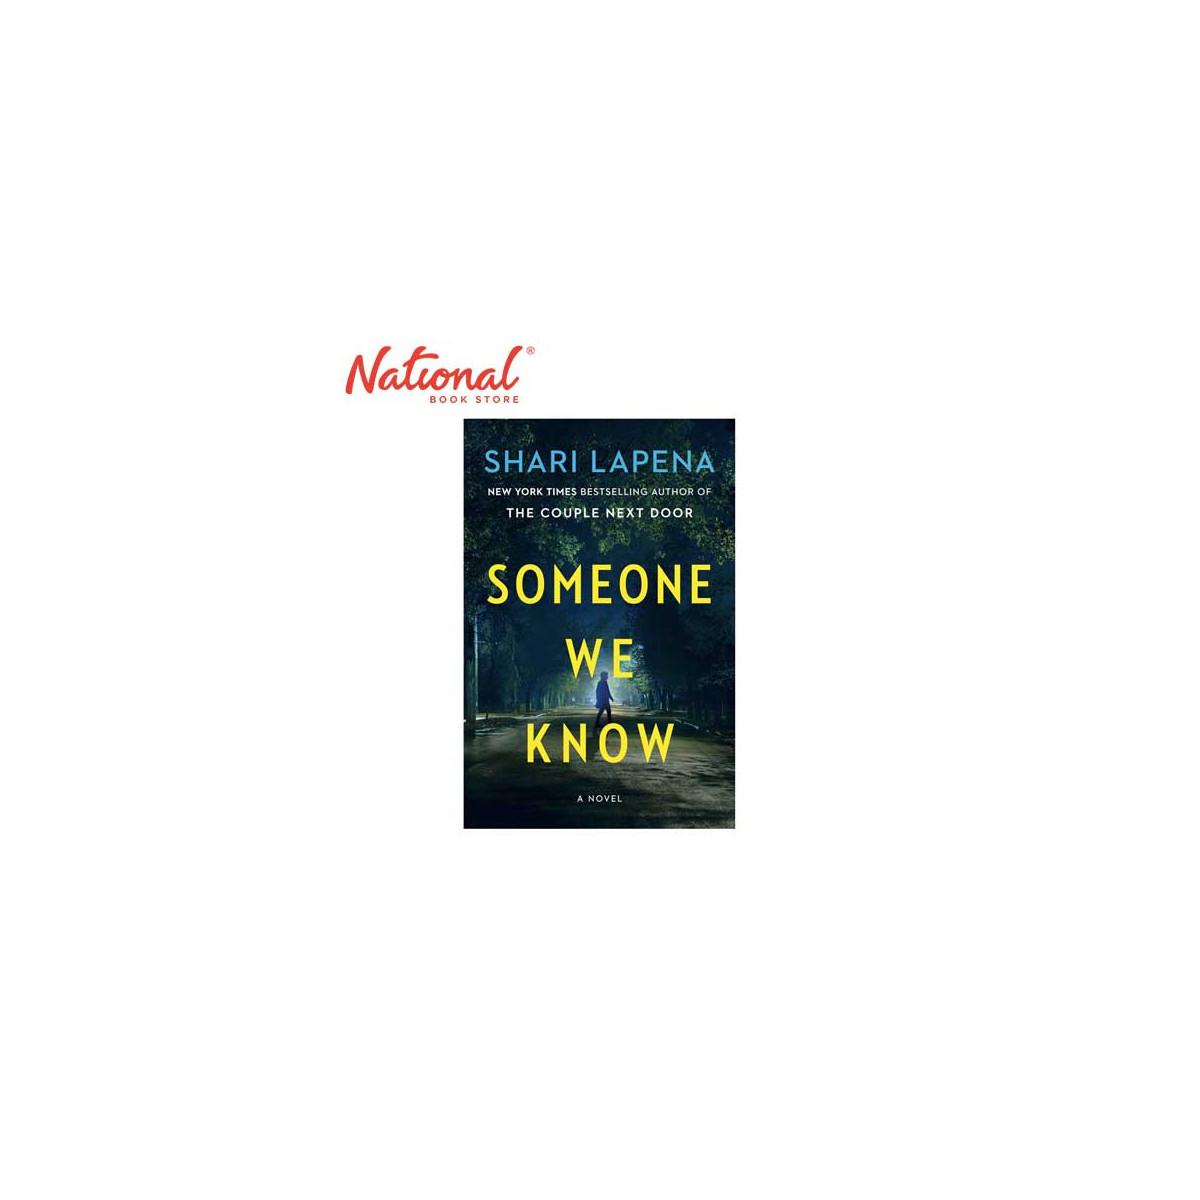 Someone We Know: A Novel by Shari Lapena - Trade Paperback - Thriller - Mystery - Suspense